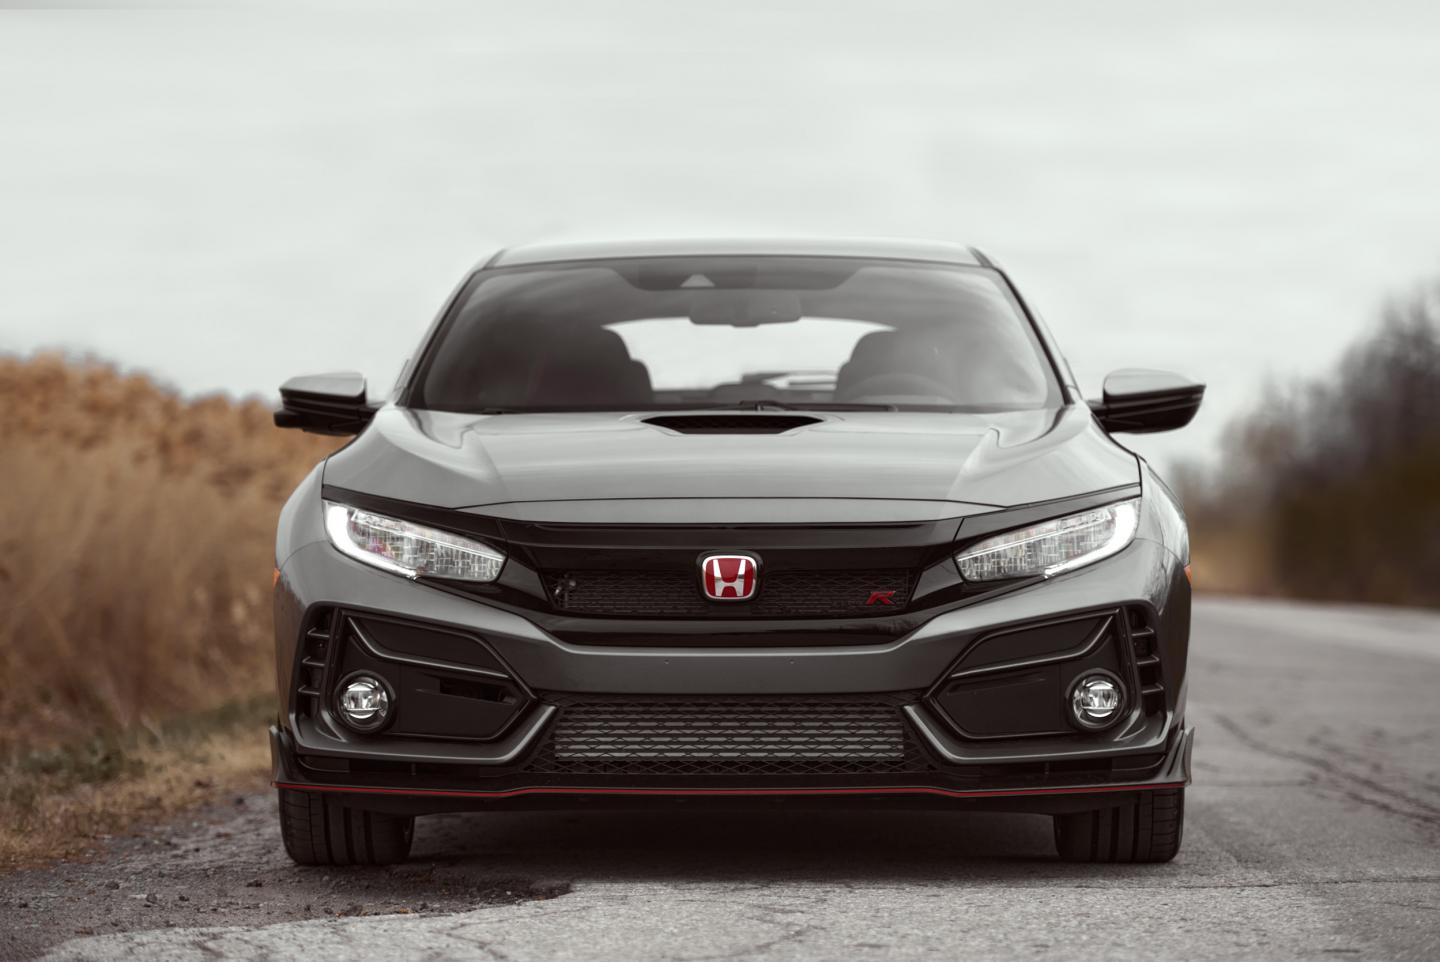 2021 Honda Civic Type R Showed Me What It's Worth One Last Time